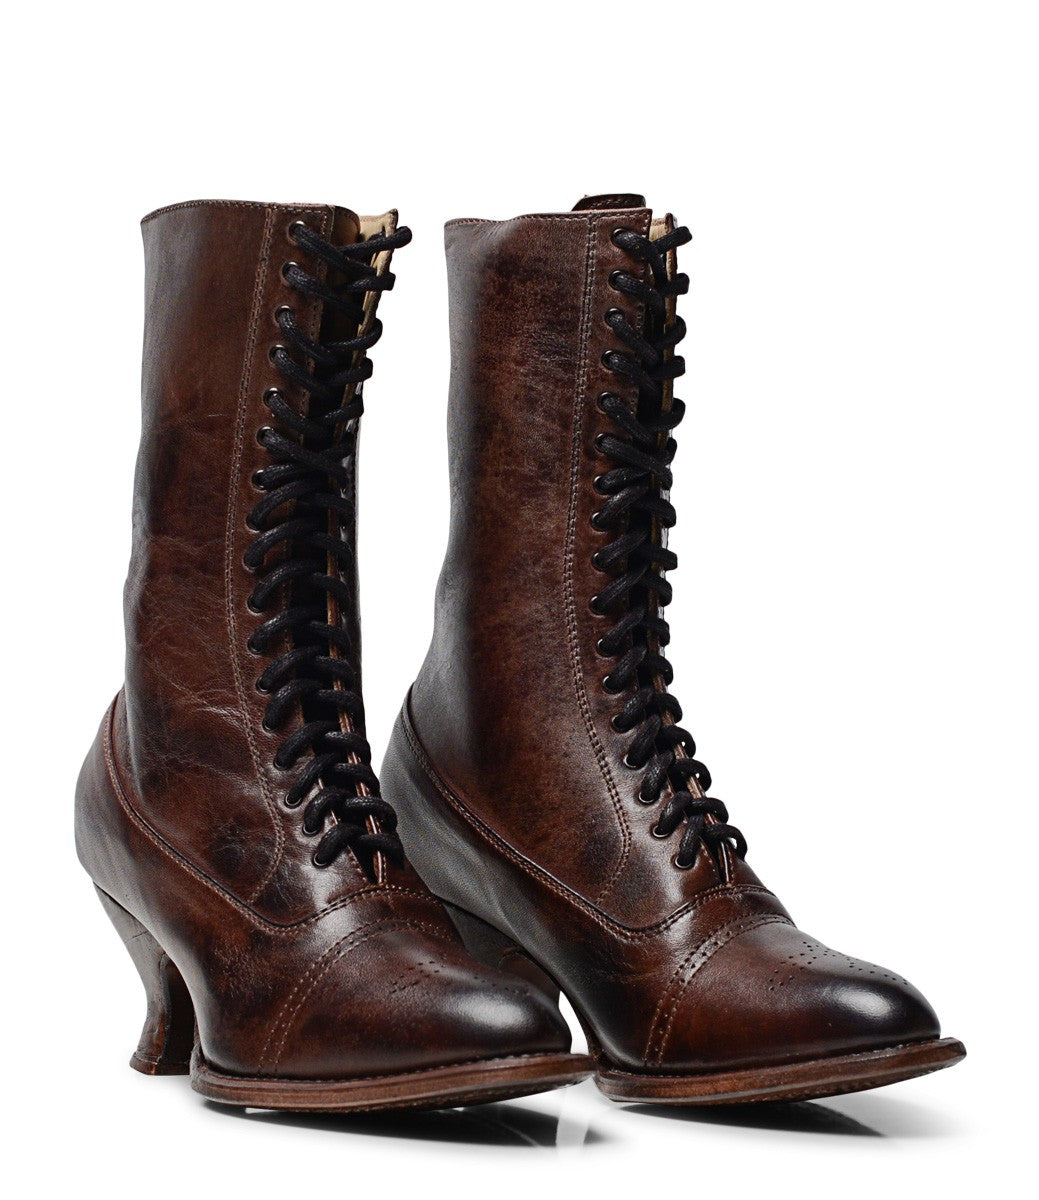 Victorian Mid-Calf Leather Boots in Teak Rustic